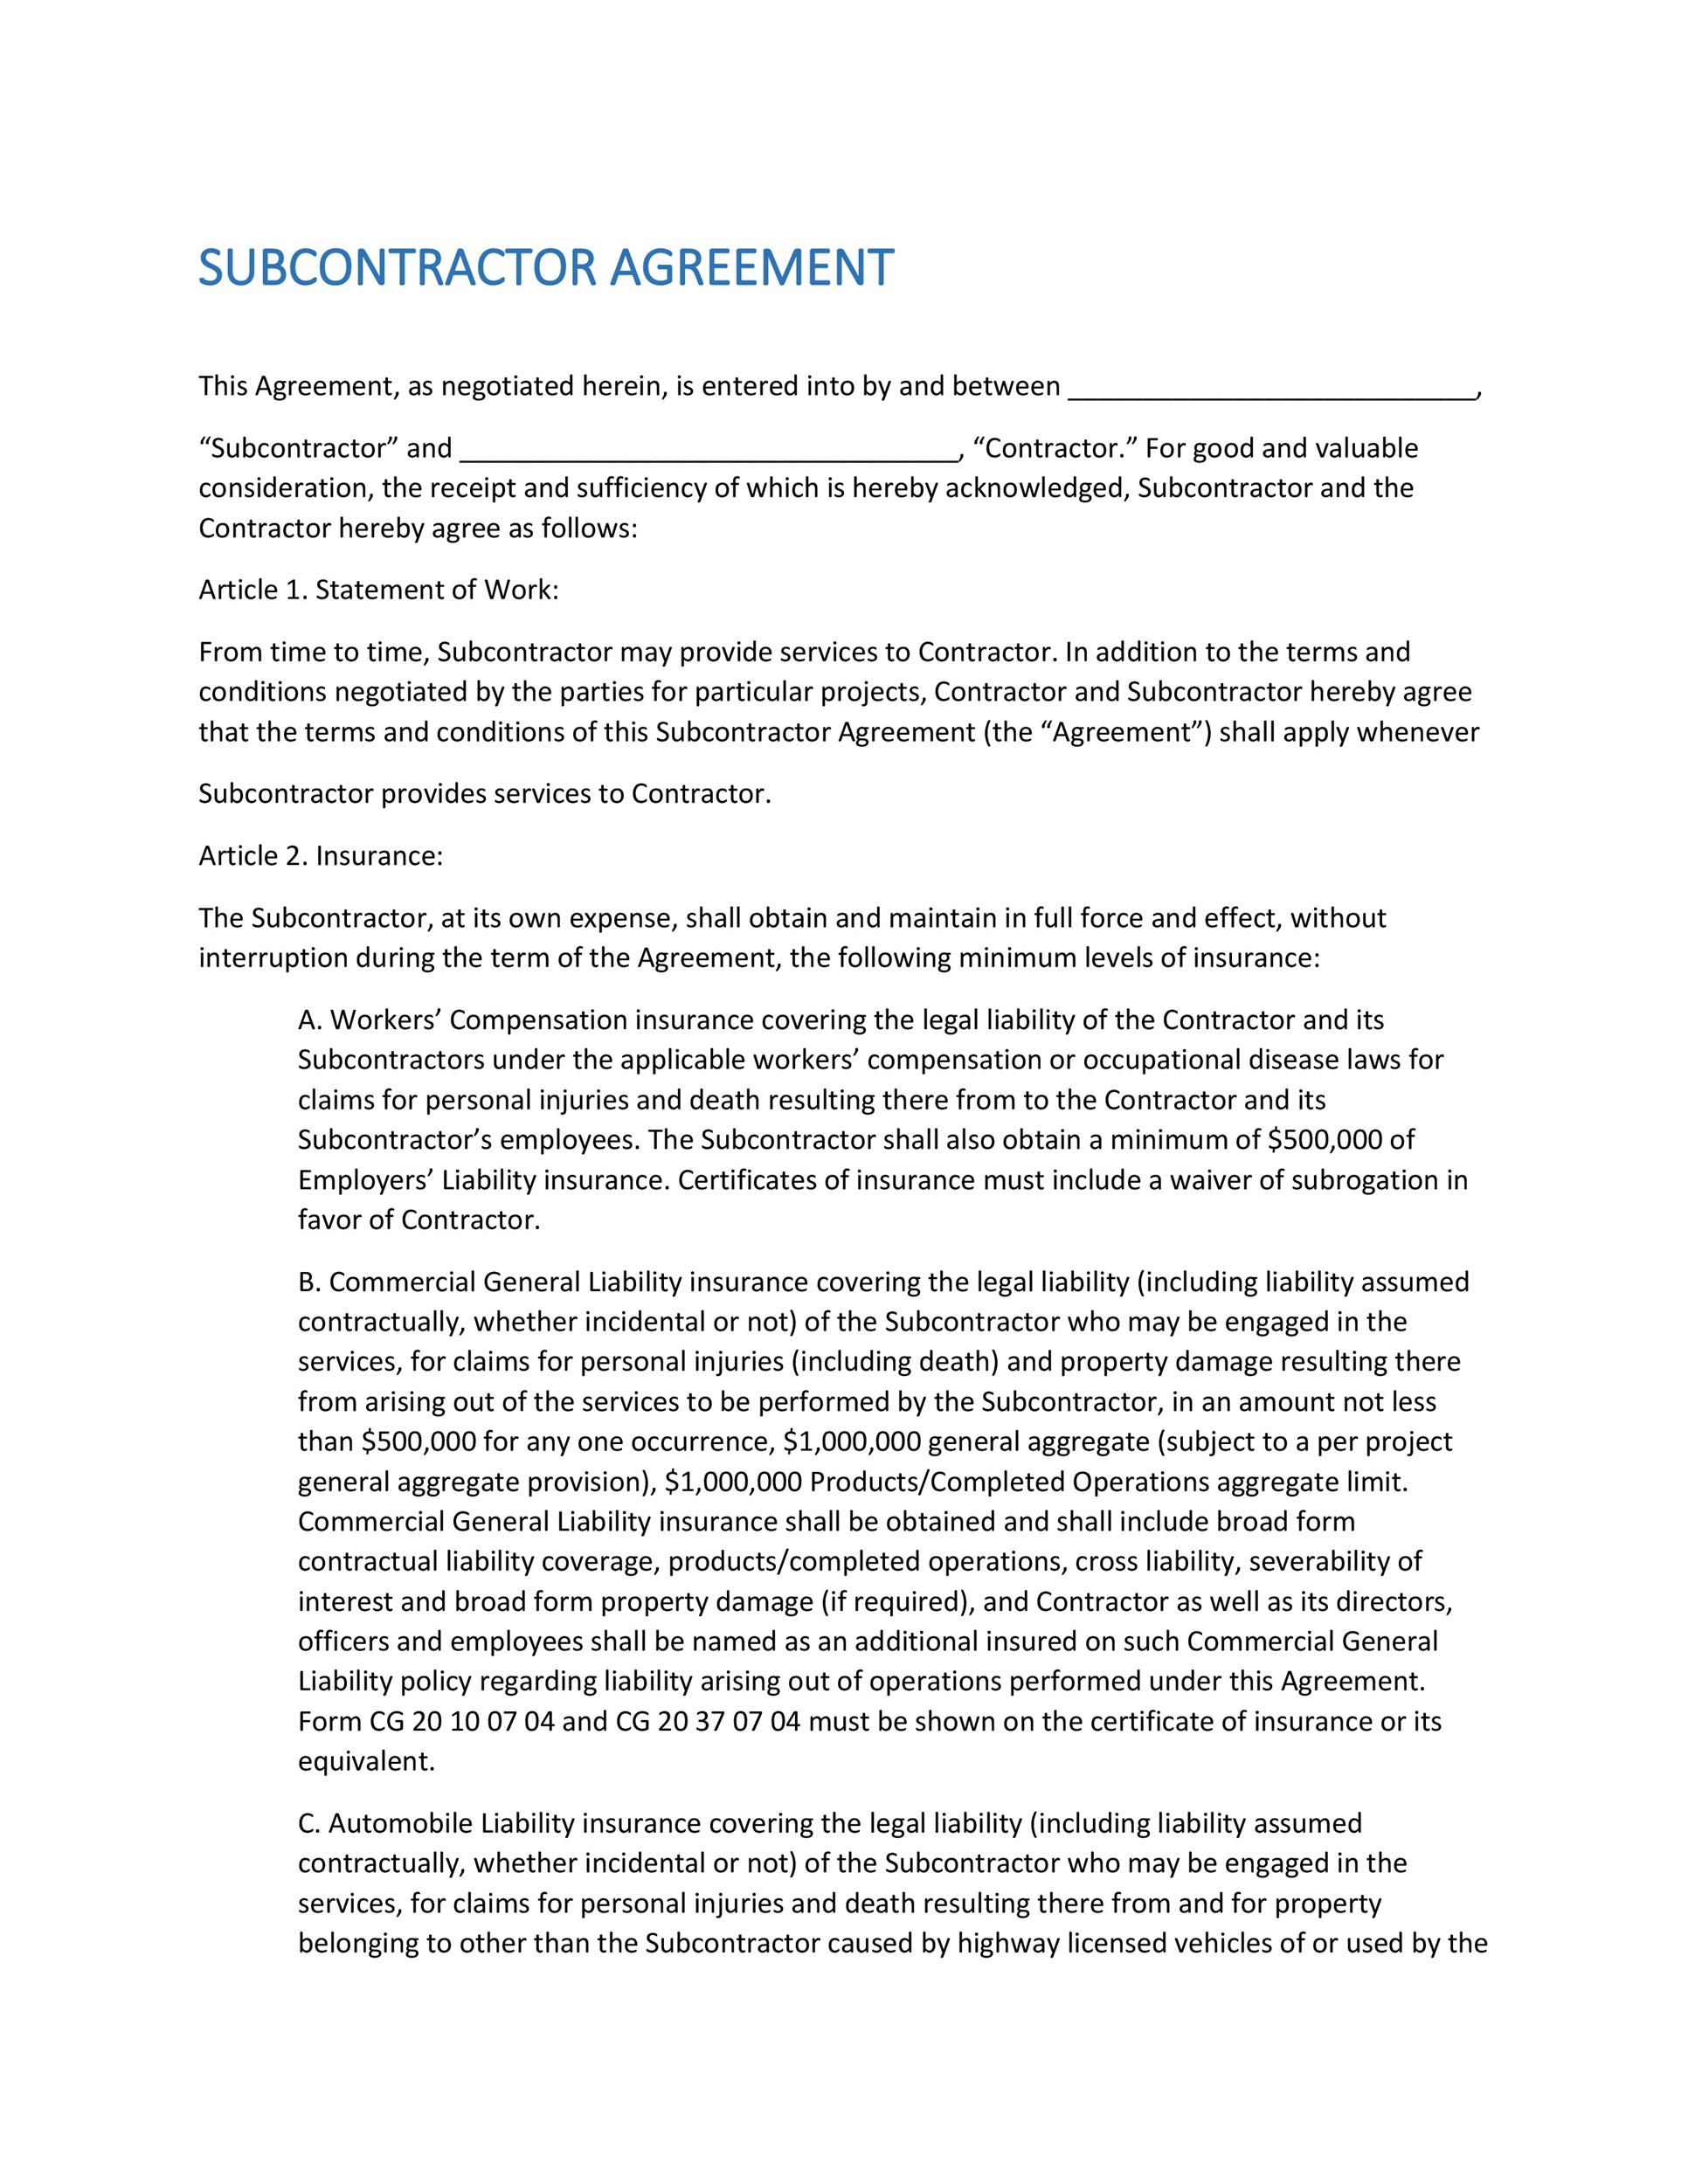 Need a Subcontractor Agreement? 39 Free Templates HERE